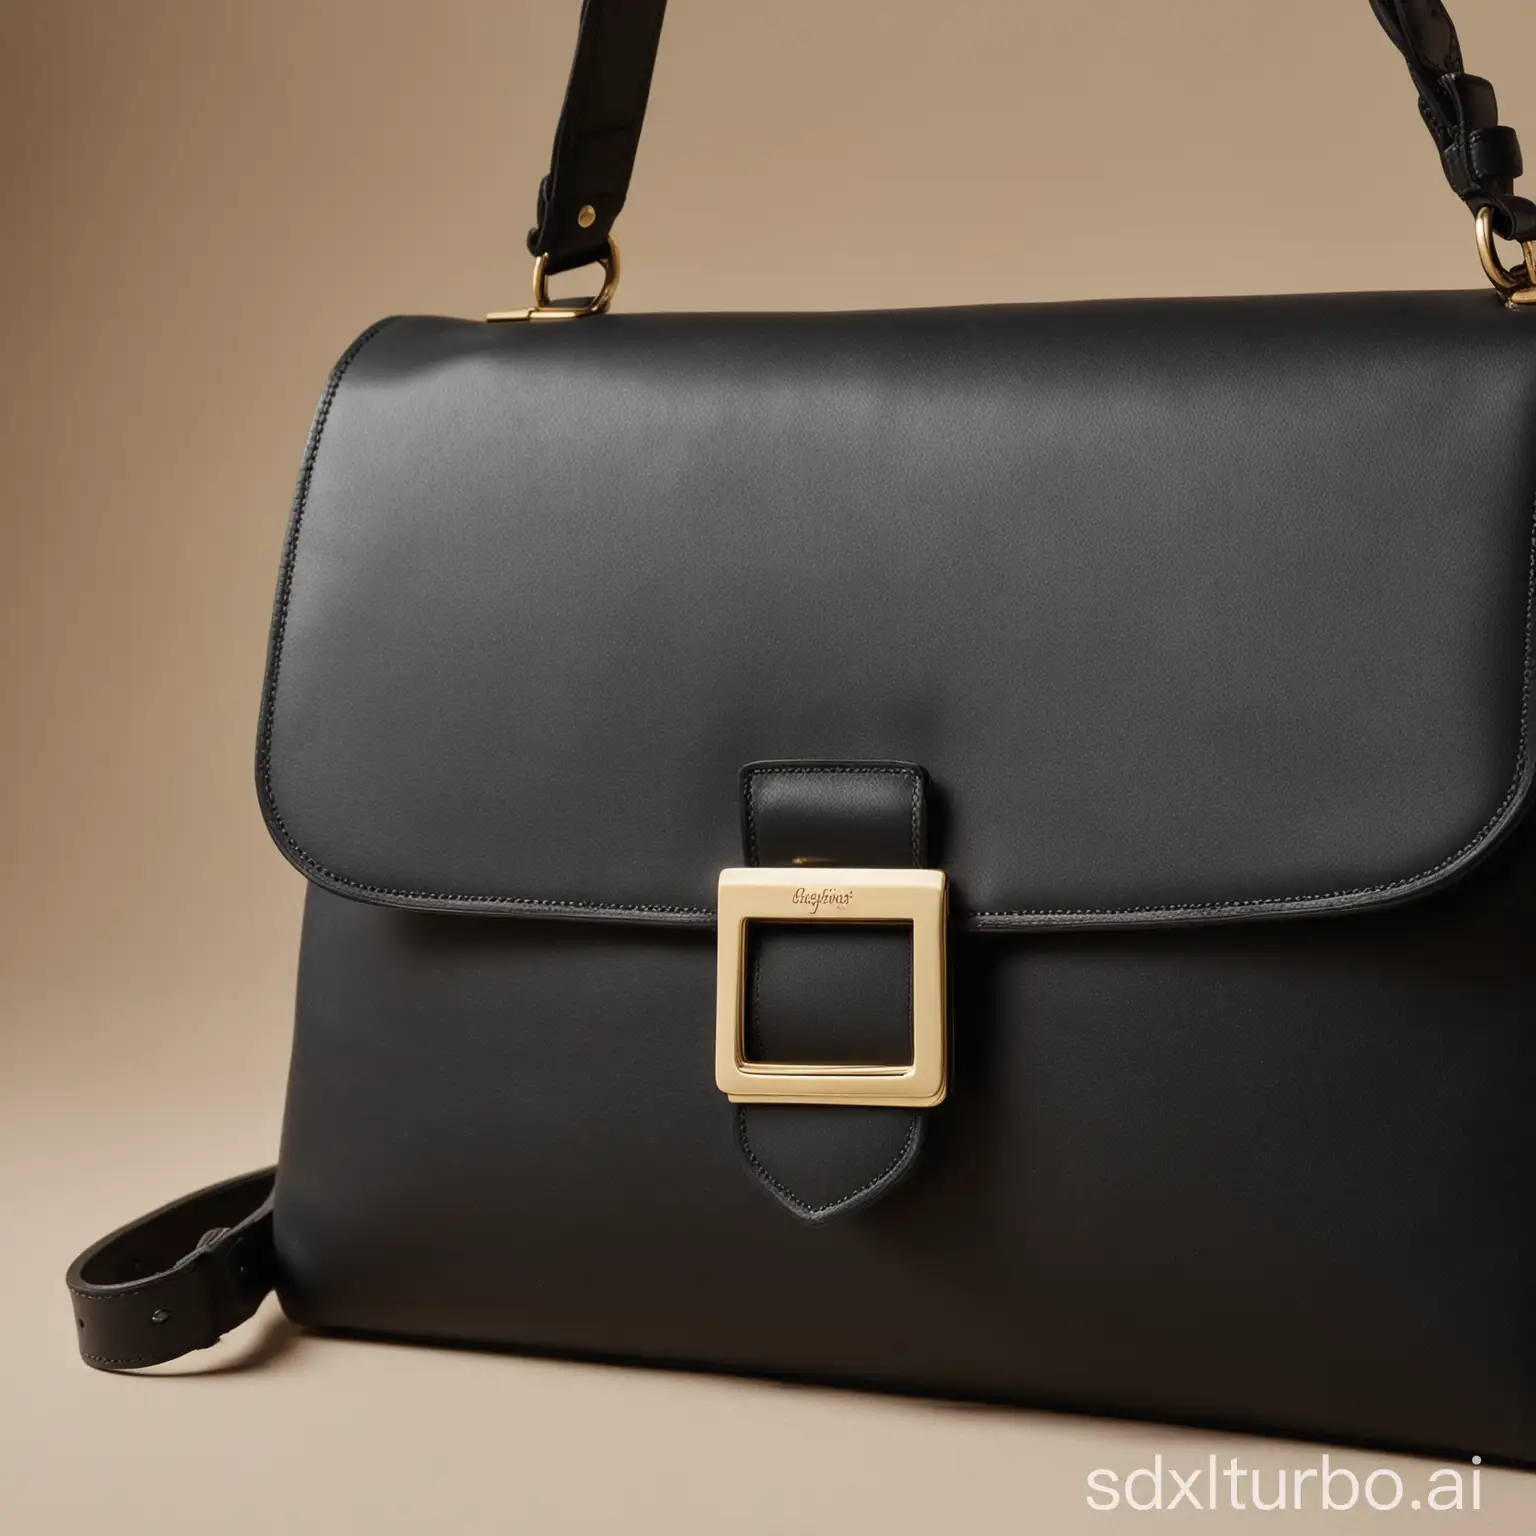 A close-up of a black leather handbag. The bag is made of a soft, supple leather and has a classic design with a flap closure and a gold-tone metal buckle. The bag is resting on a neutral background, such as a white or gray surface.